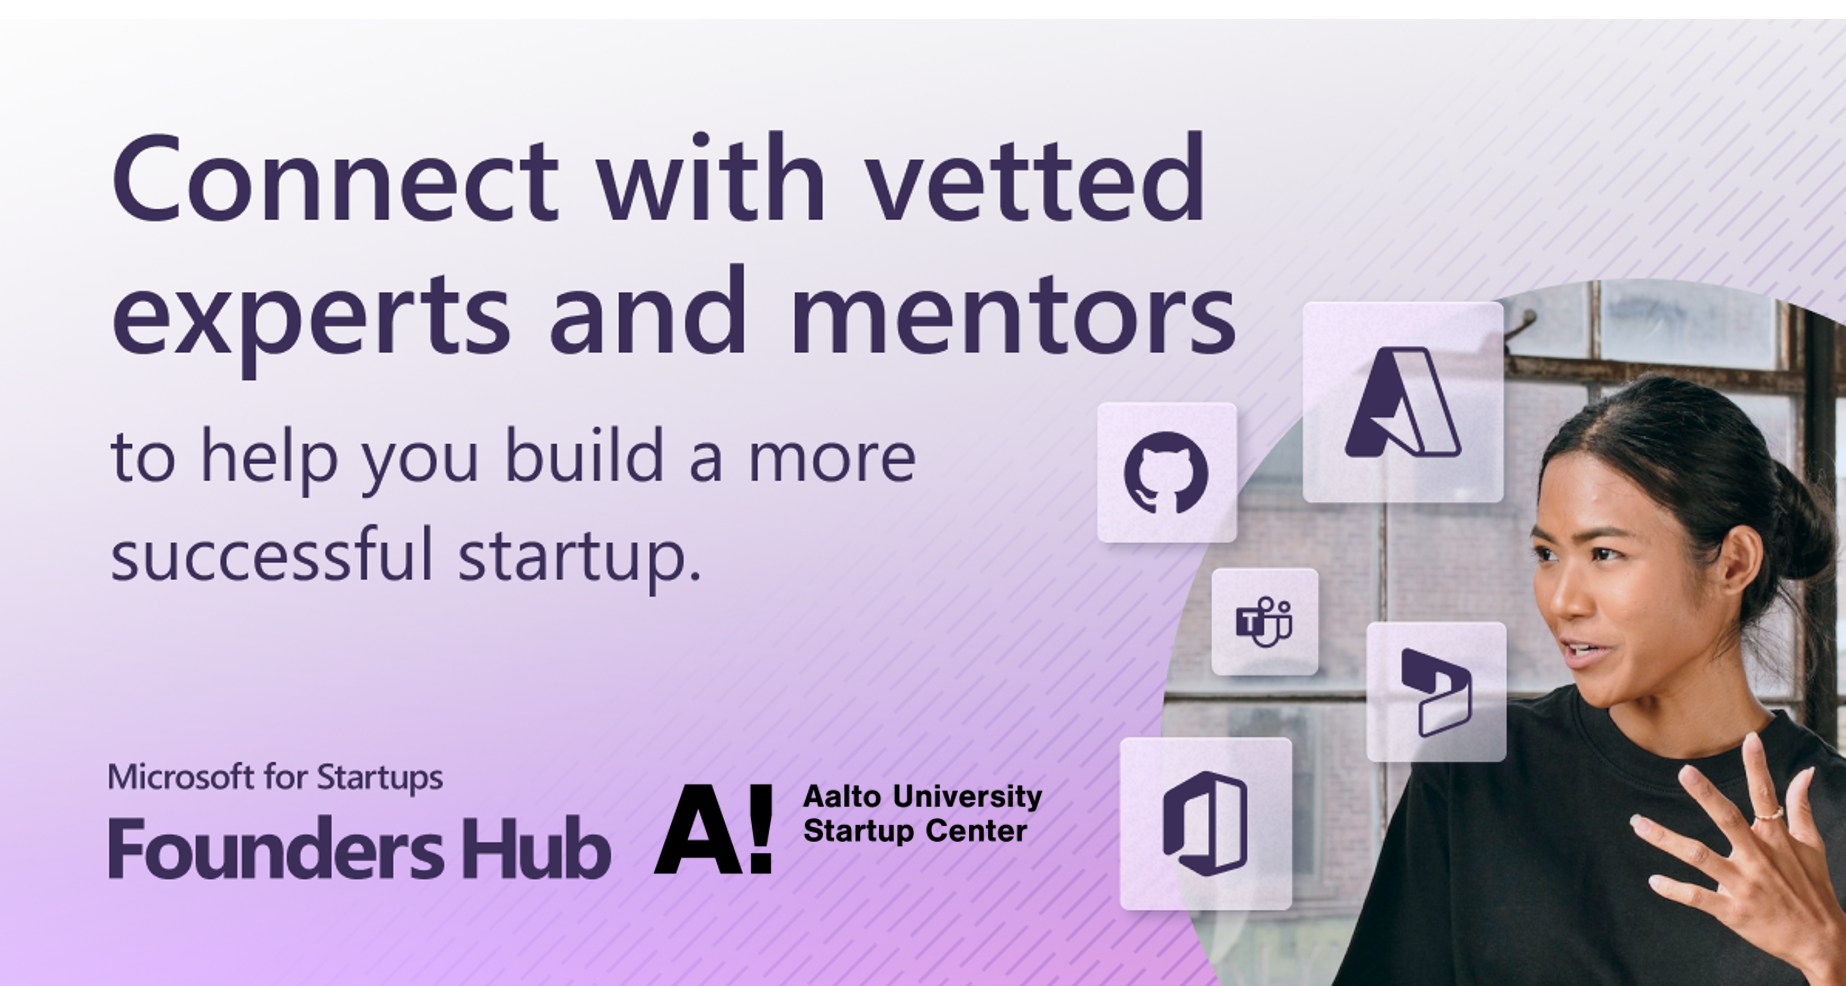 "Connect with vetted experts and mentors to help you build a more successful startup. Microsoft for Startups Founders Hub. Aalto University Startup Center."